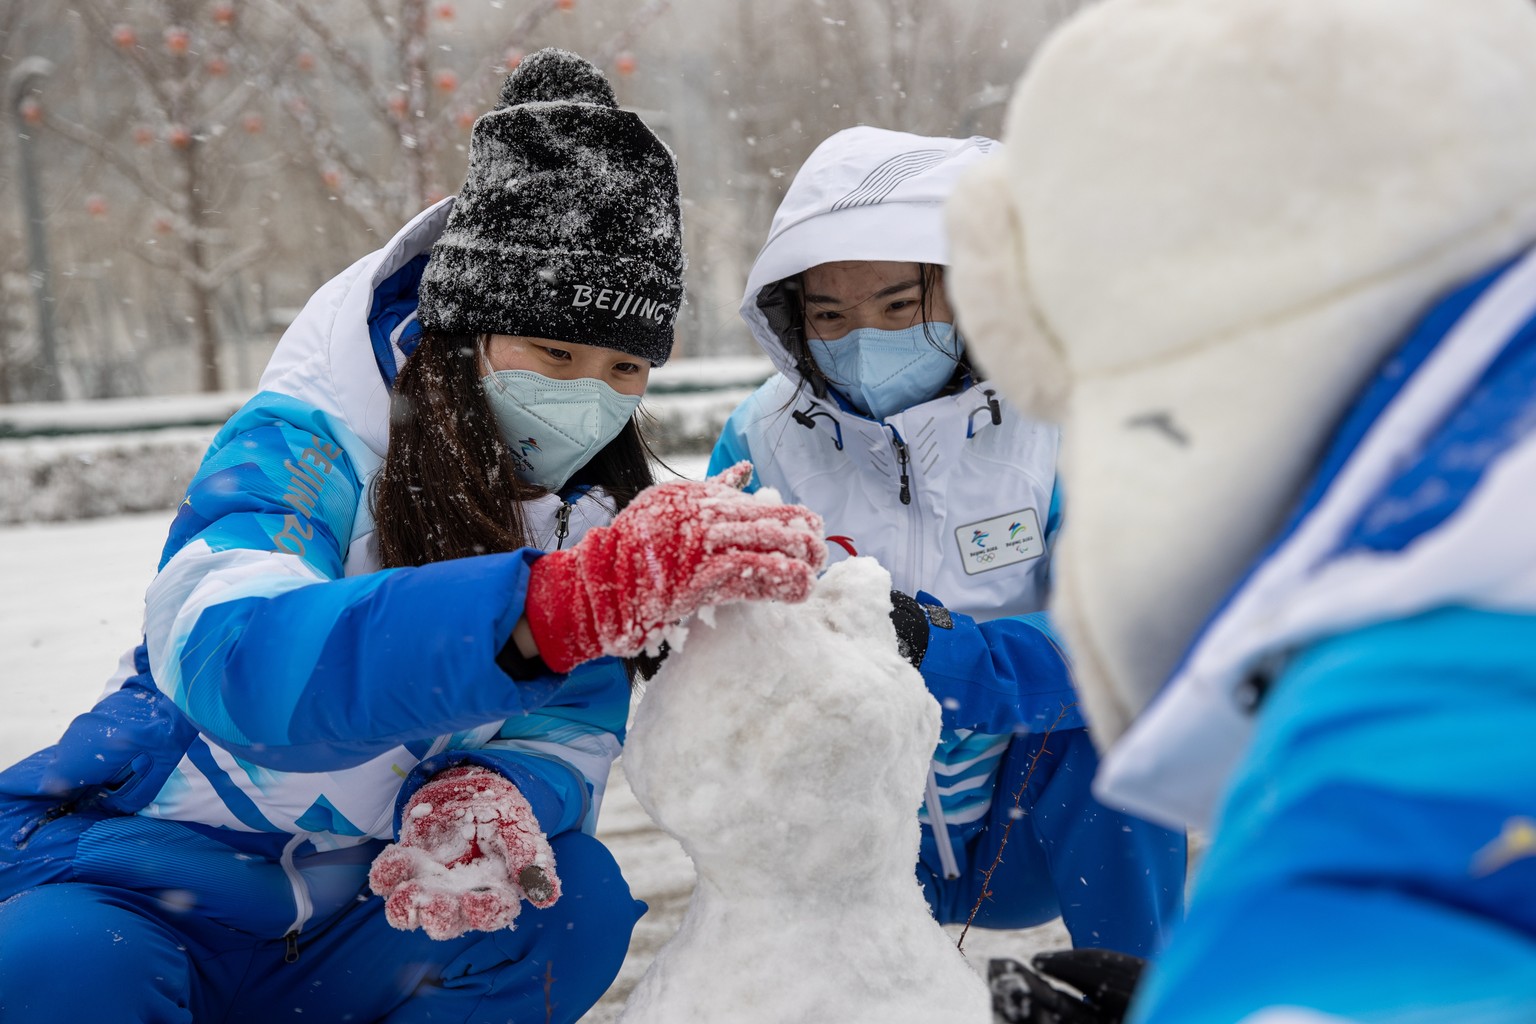 epa09751653 Olympic staff build a snow man during a snow fall in a park part of the Olympic bubble near the Main Media Centre during the Beijing 2022 Olympic Games, Beijing, China, 13 February 2022. E ...